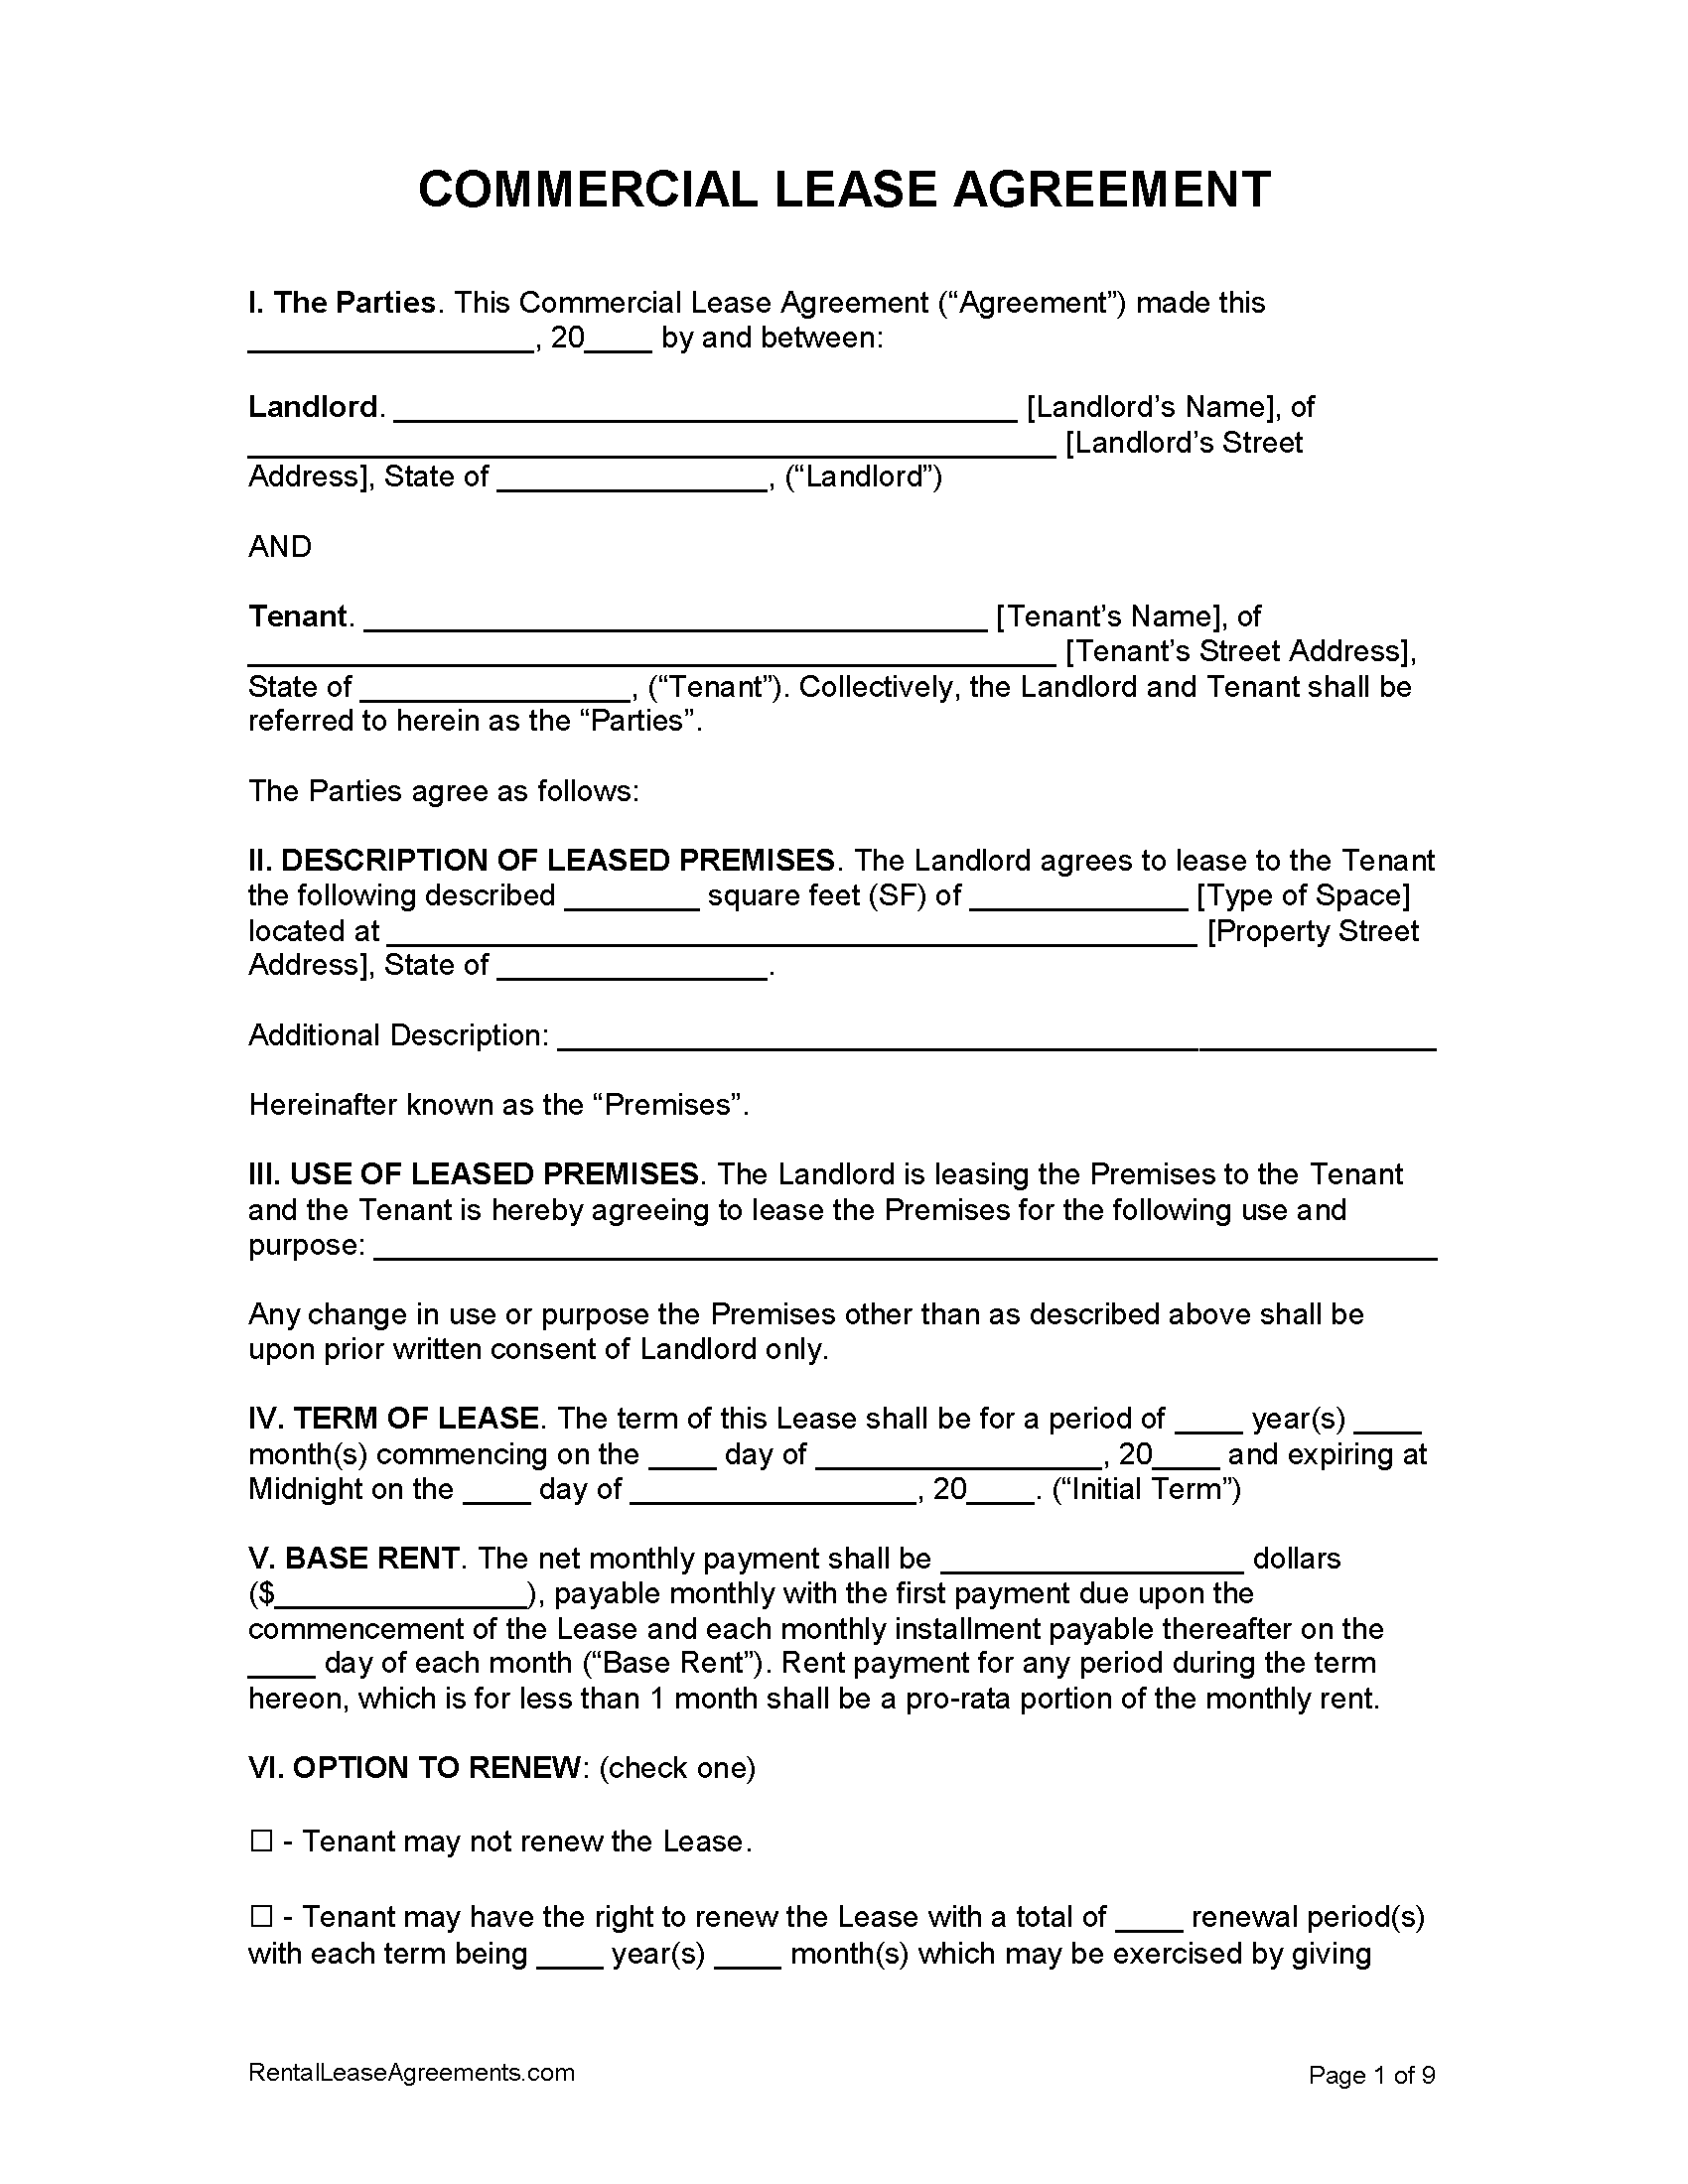 Free Commercial Lease Agreement Template  PDF - Word For pre contract deposit agreement template